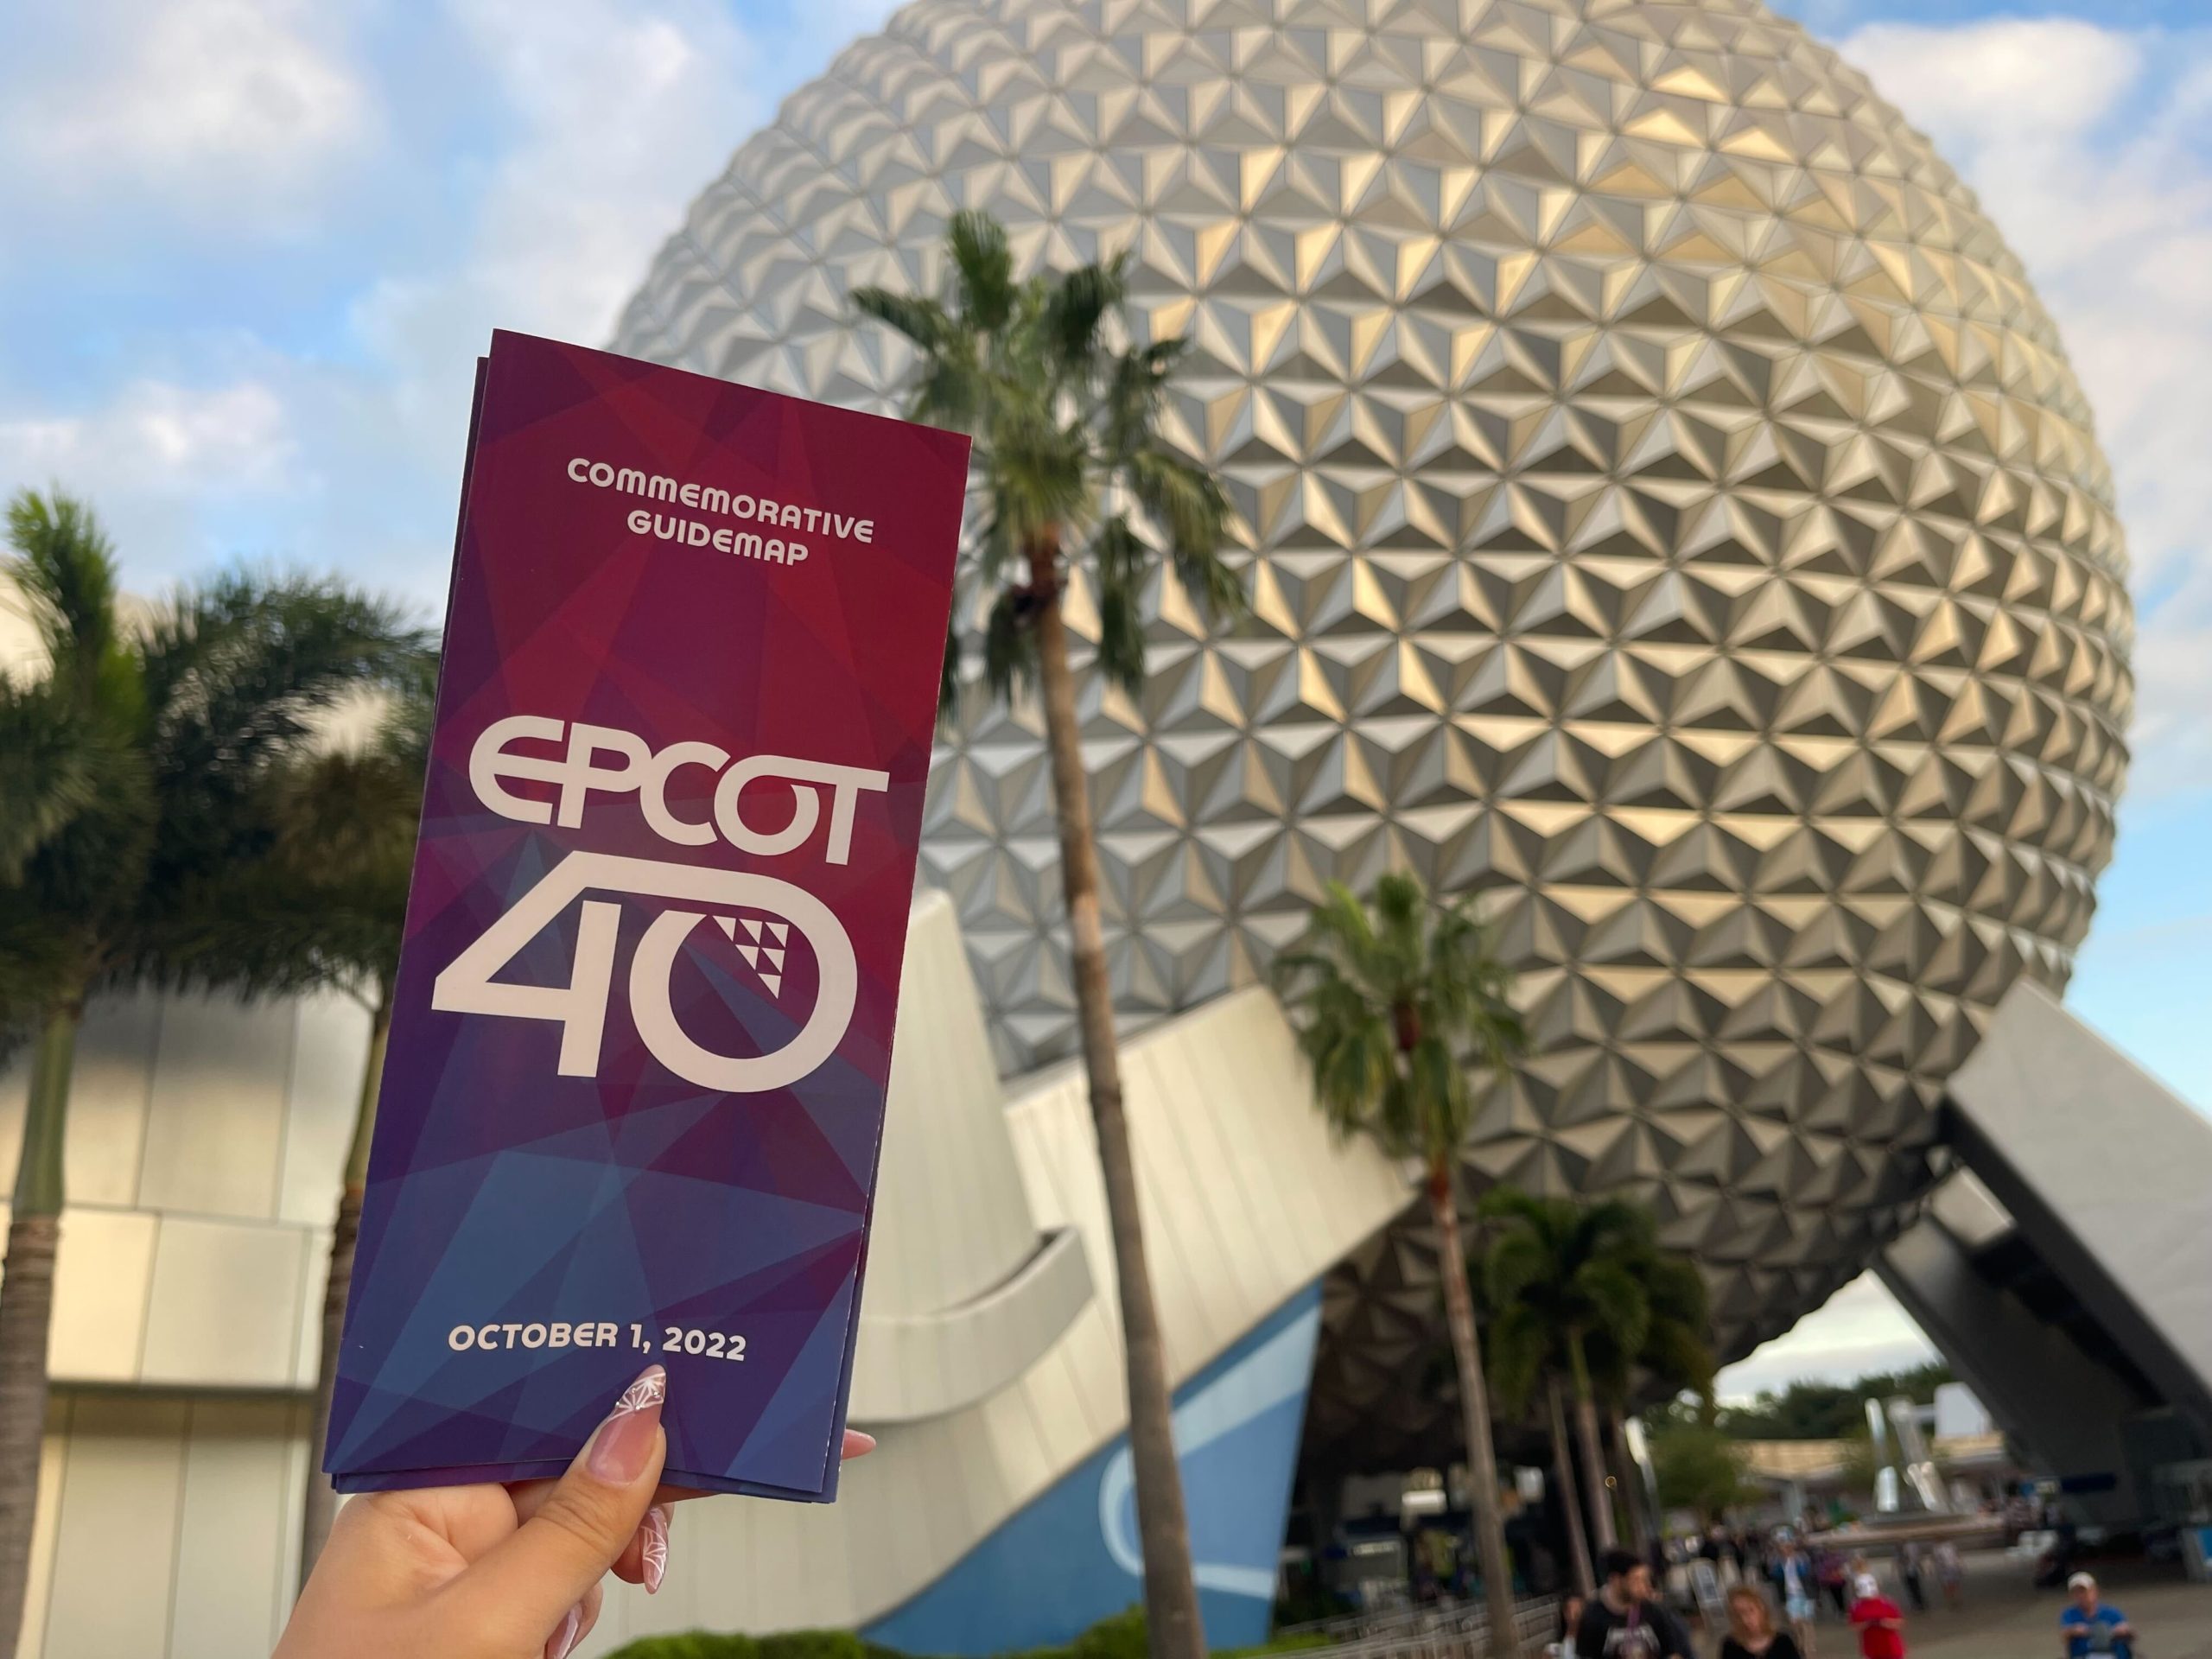 EPCOT 40th commemorative guidemap 5 scaled